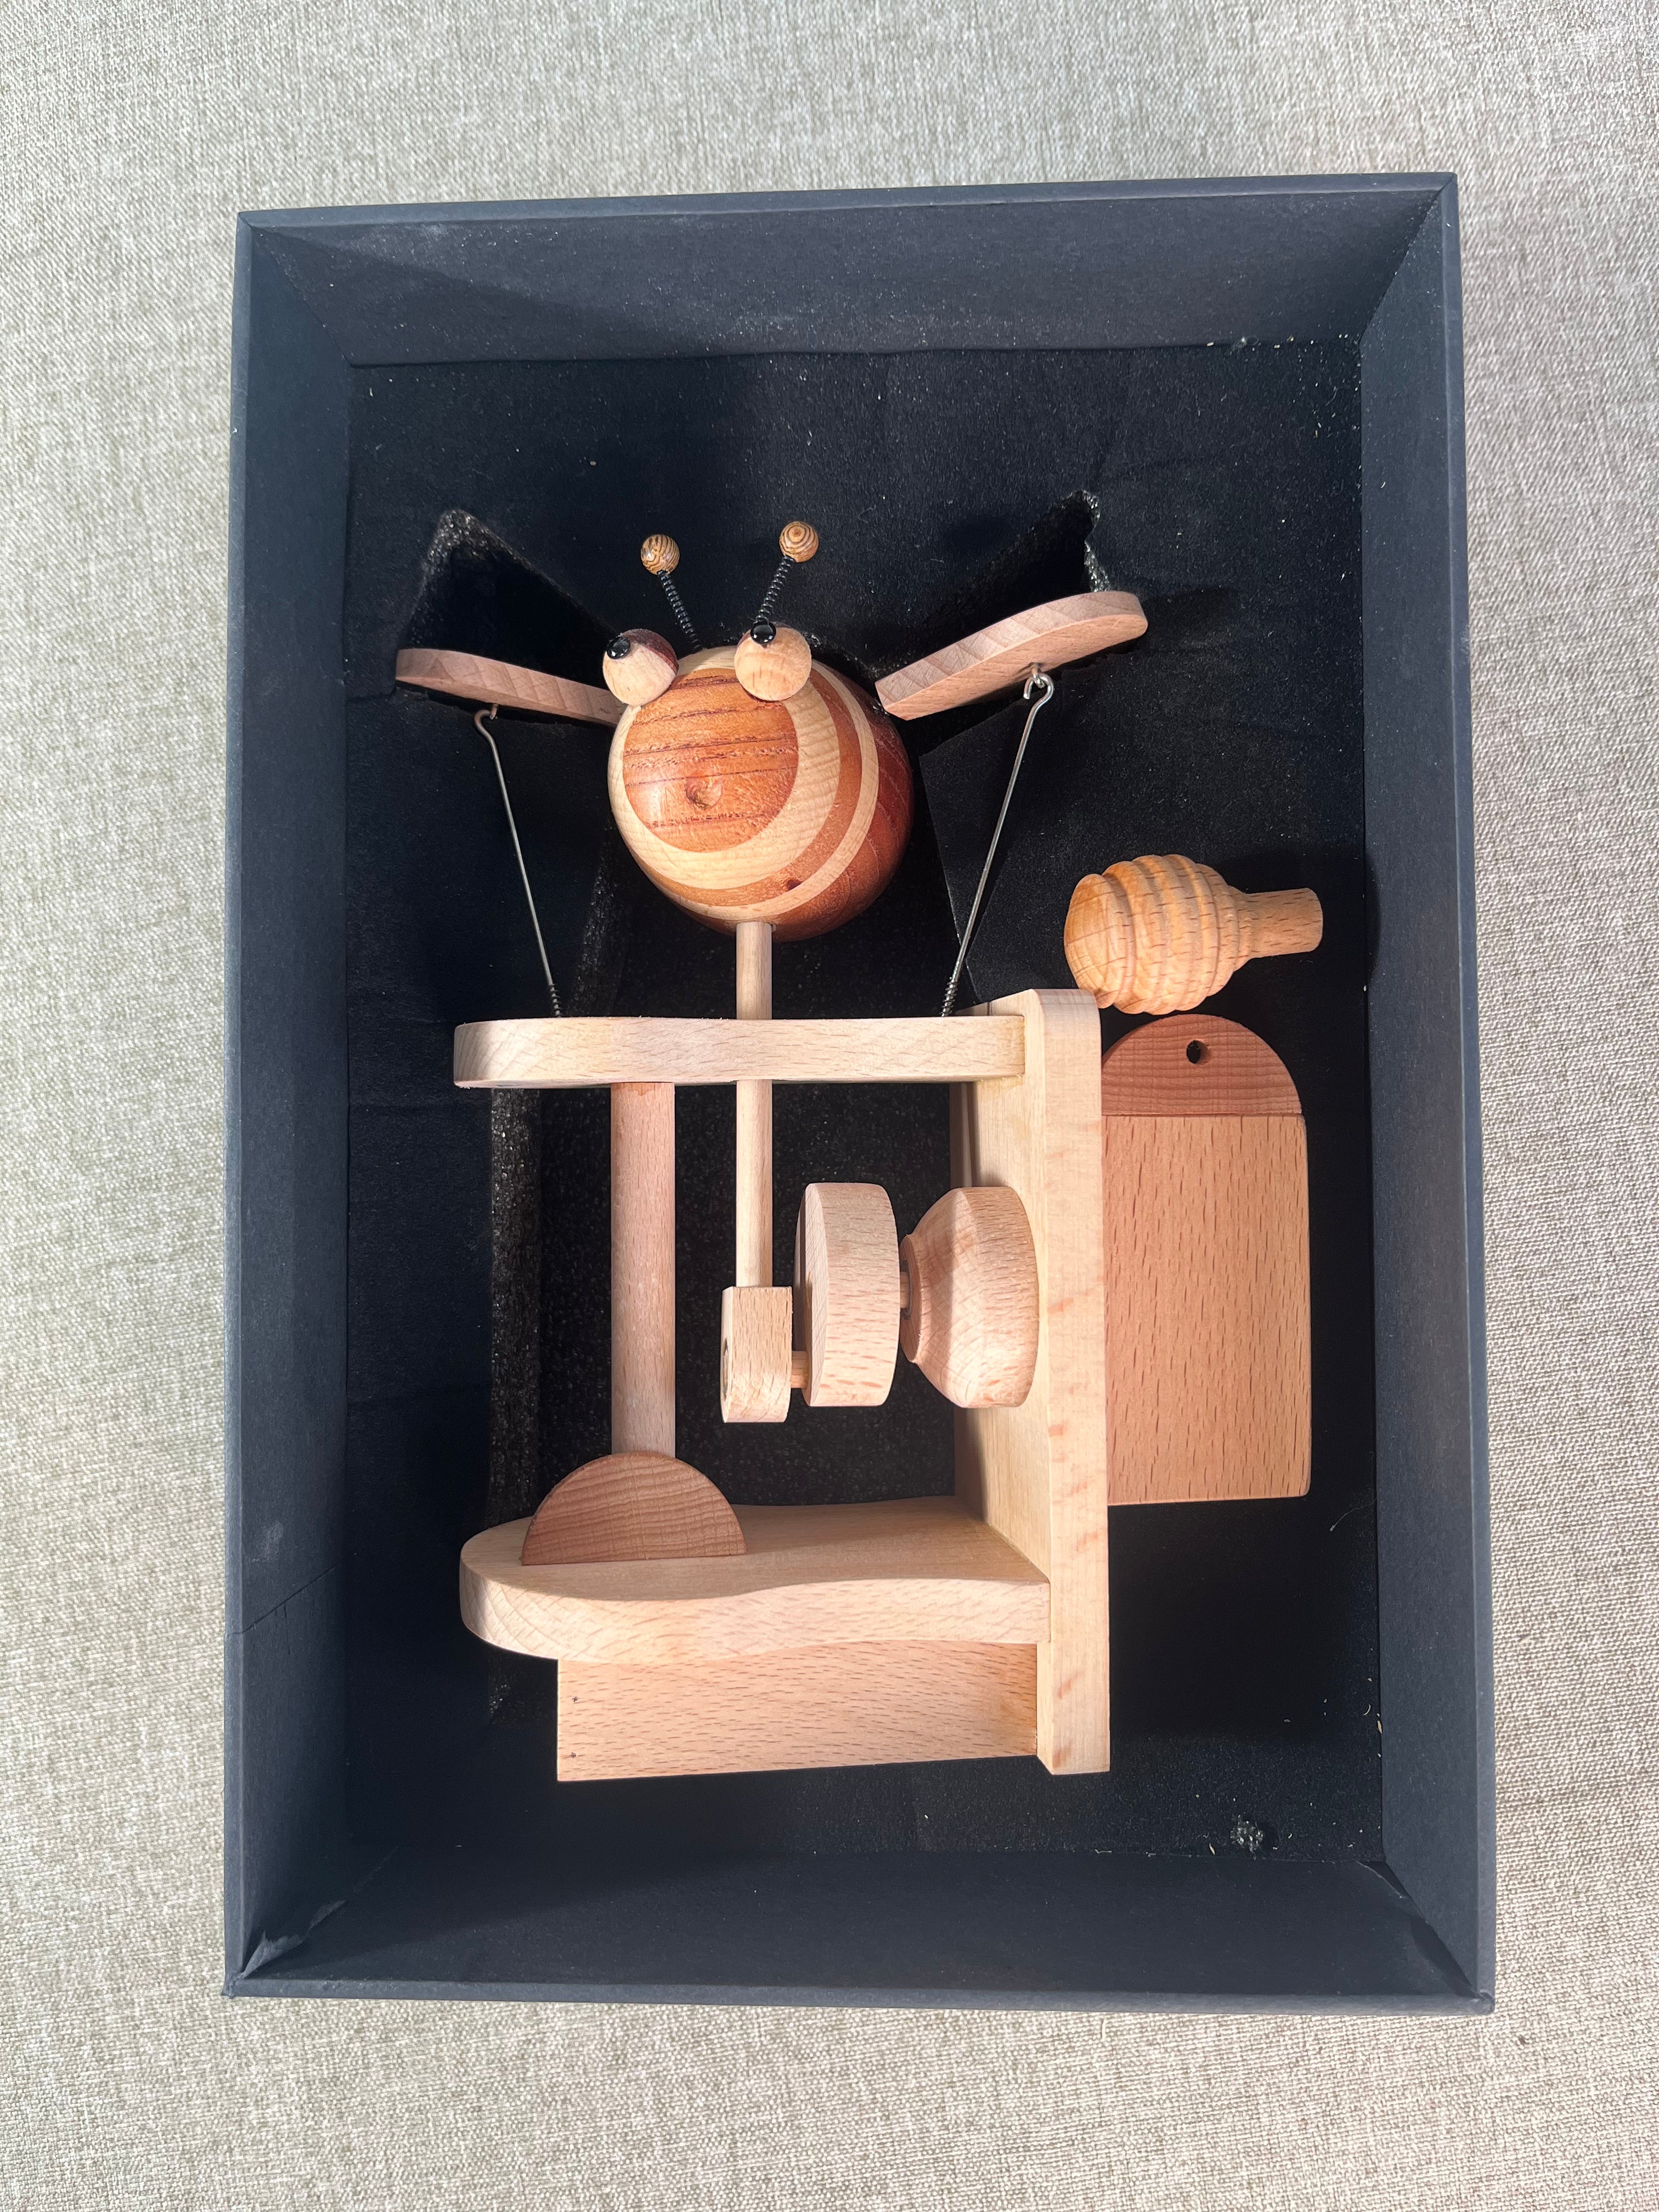 Handcrafted Wooden Electric Bee, Mechanical Wooden Toy - Mike Uncle